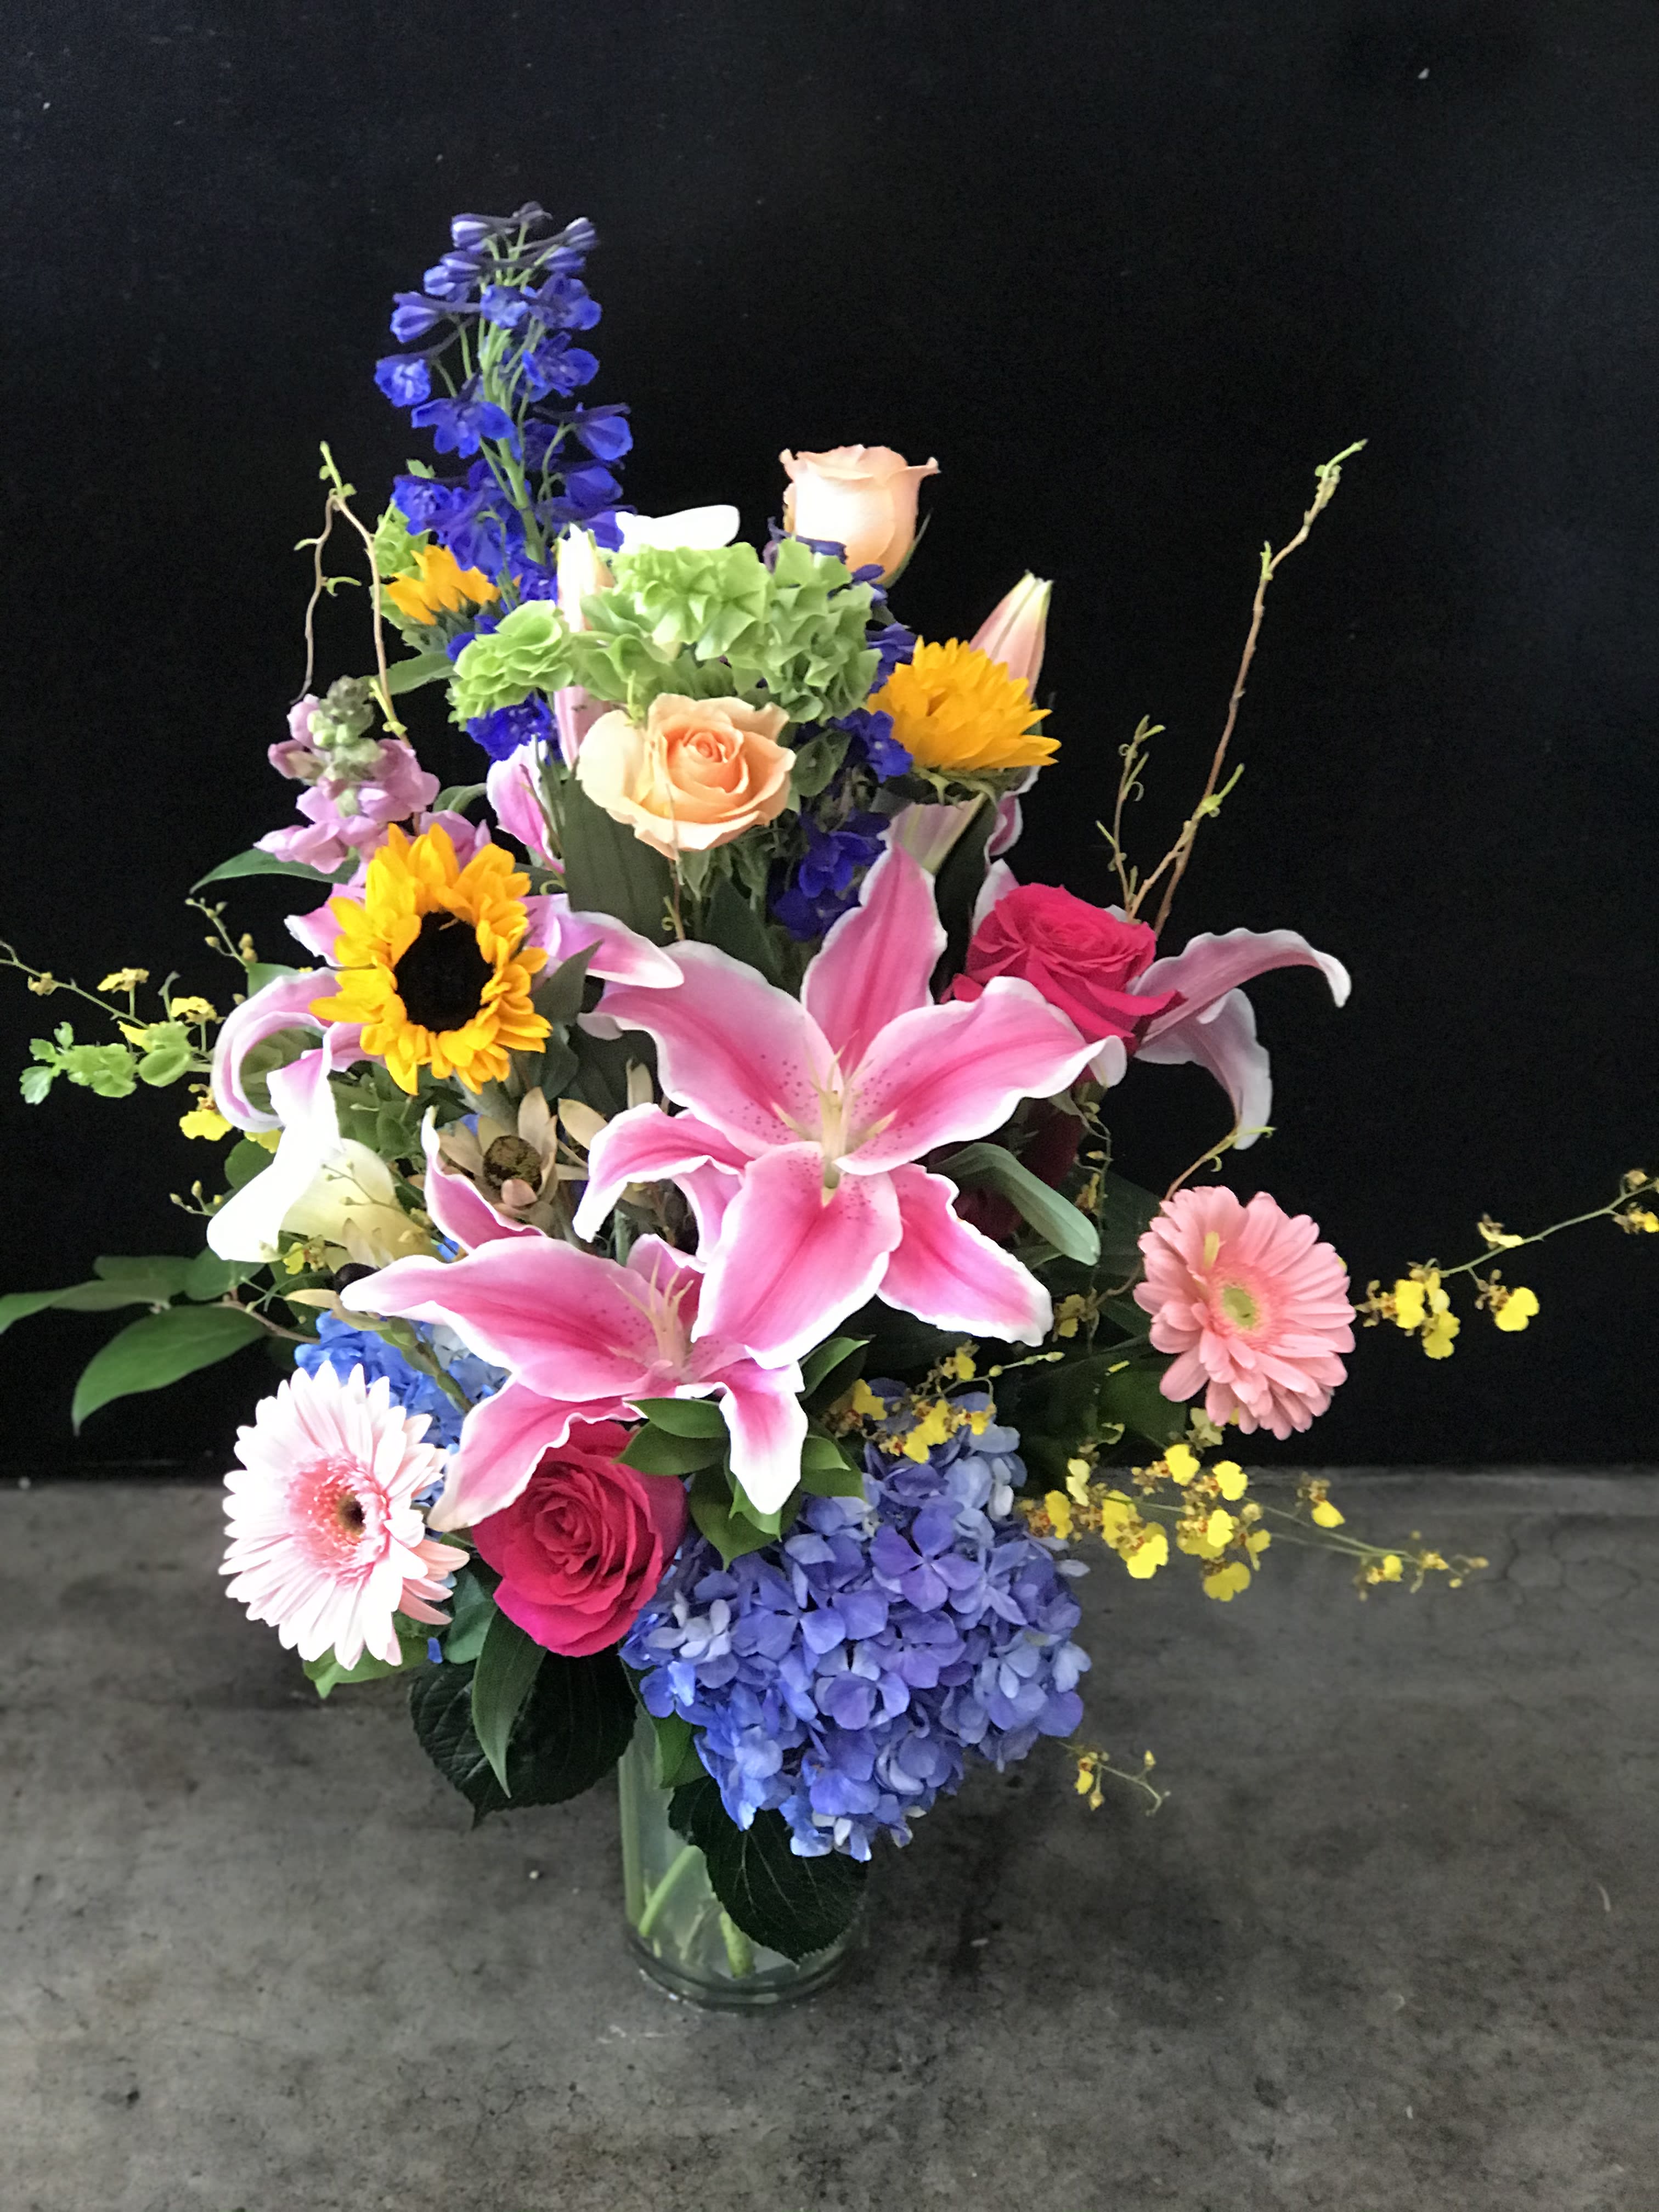 Roxie - Bright &amp; colorful Mixed Bouquet in a vase with greens